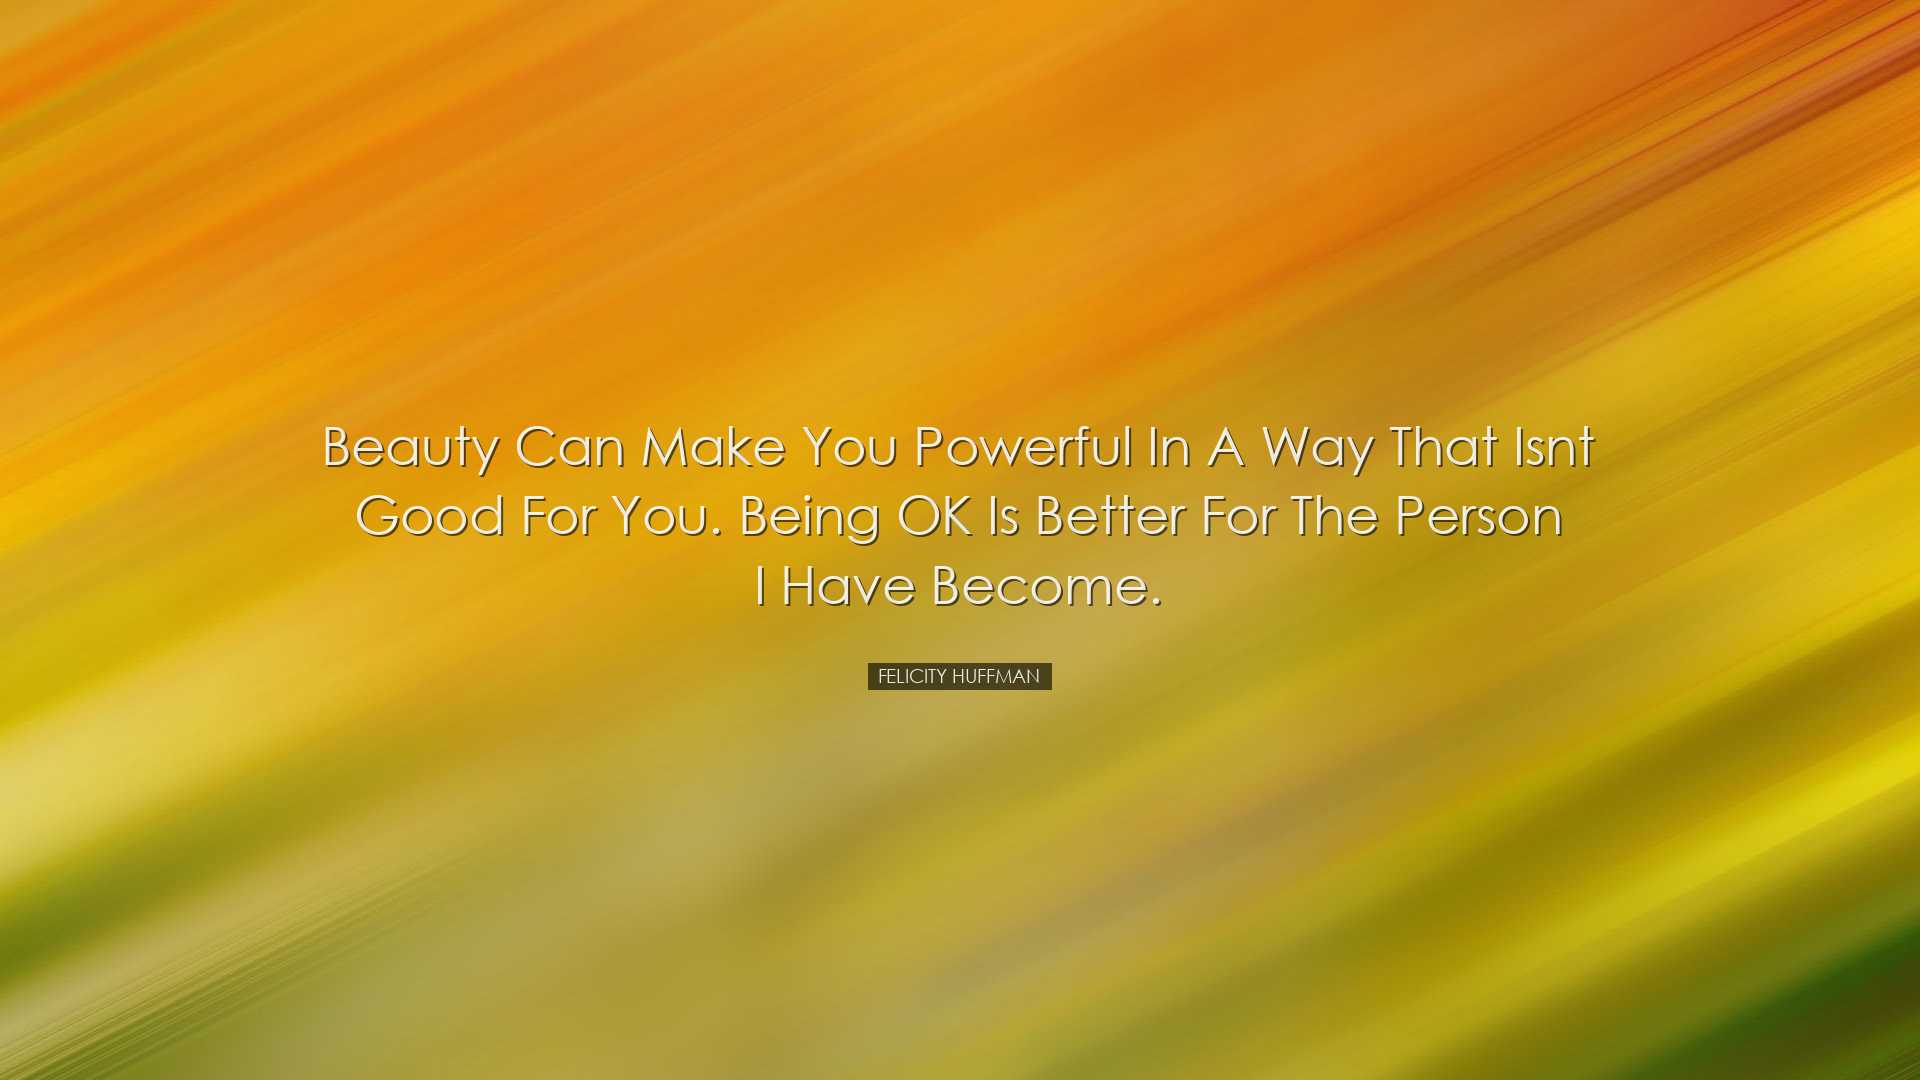 Beauty can make you powerful in a way that isnt good for you. Bein